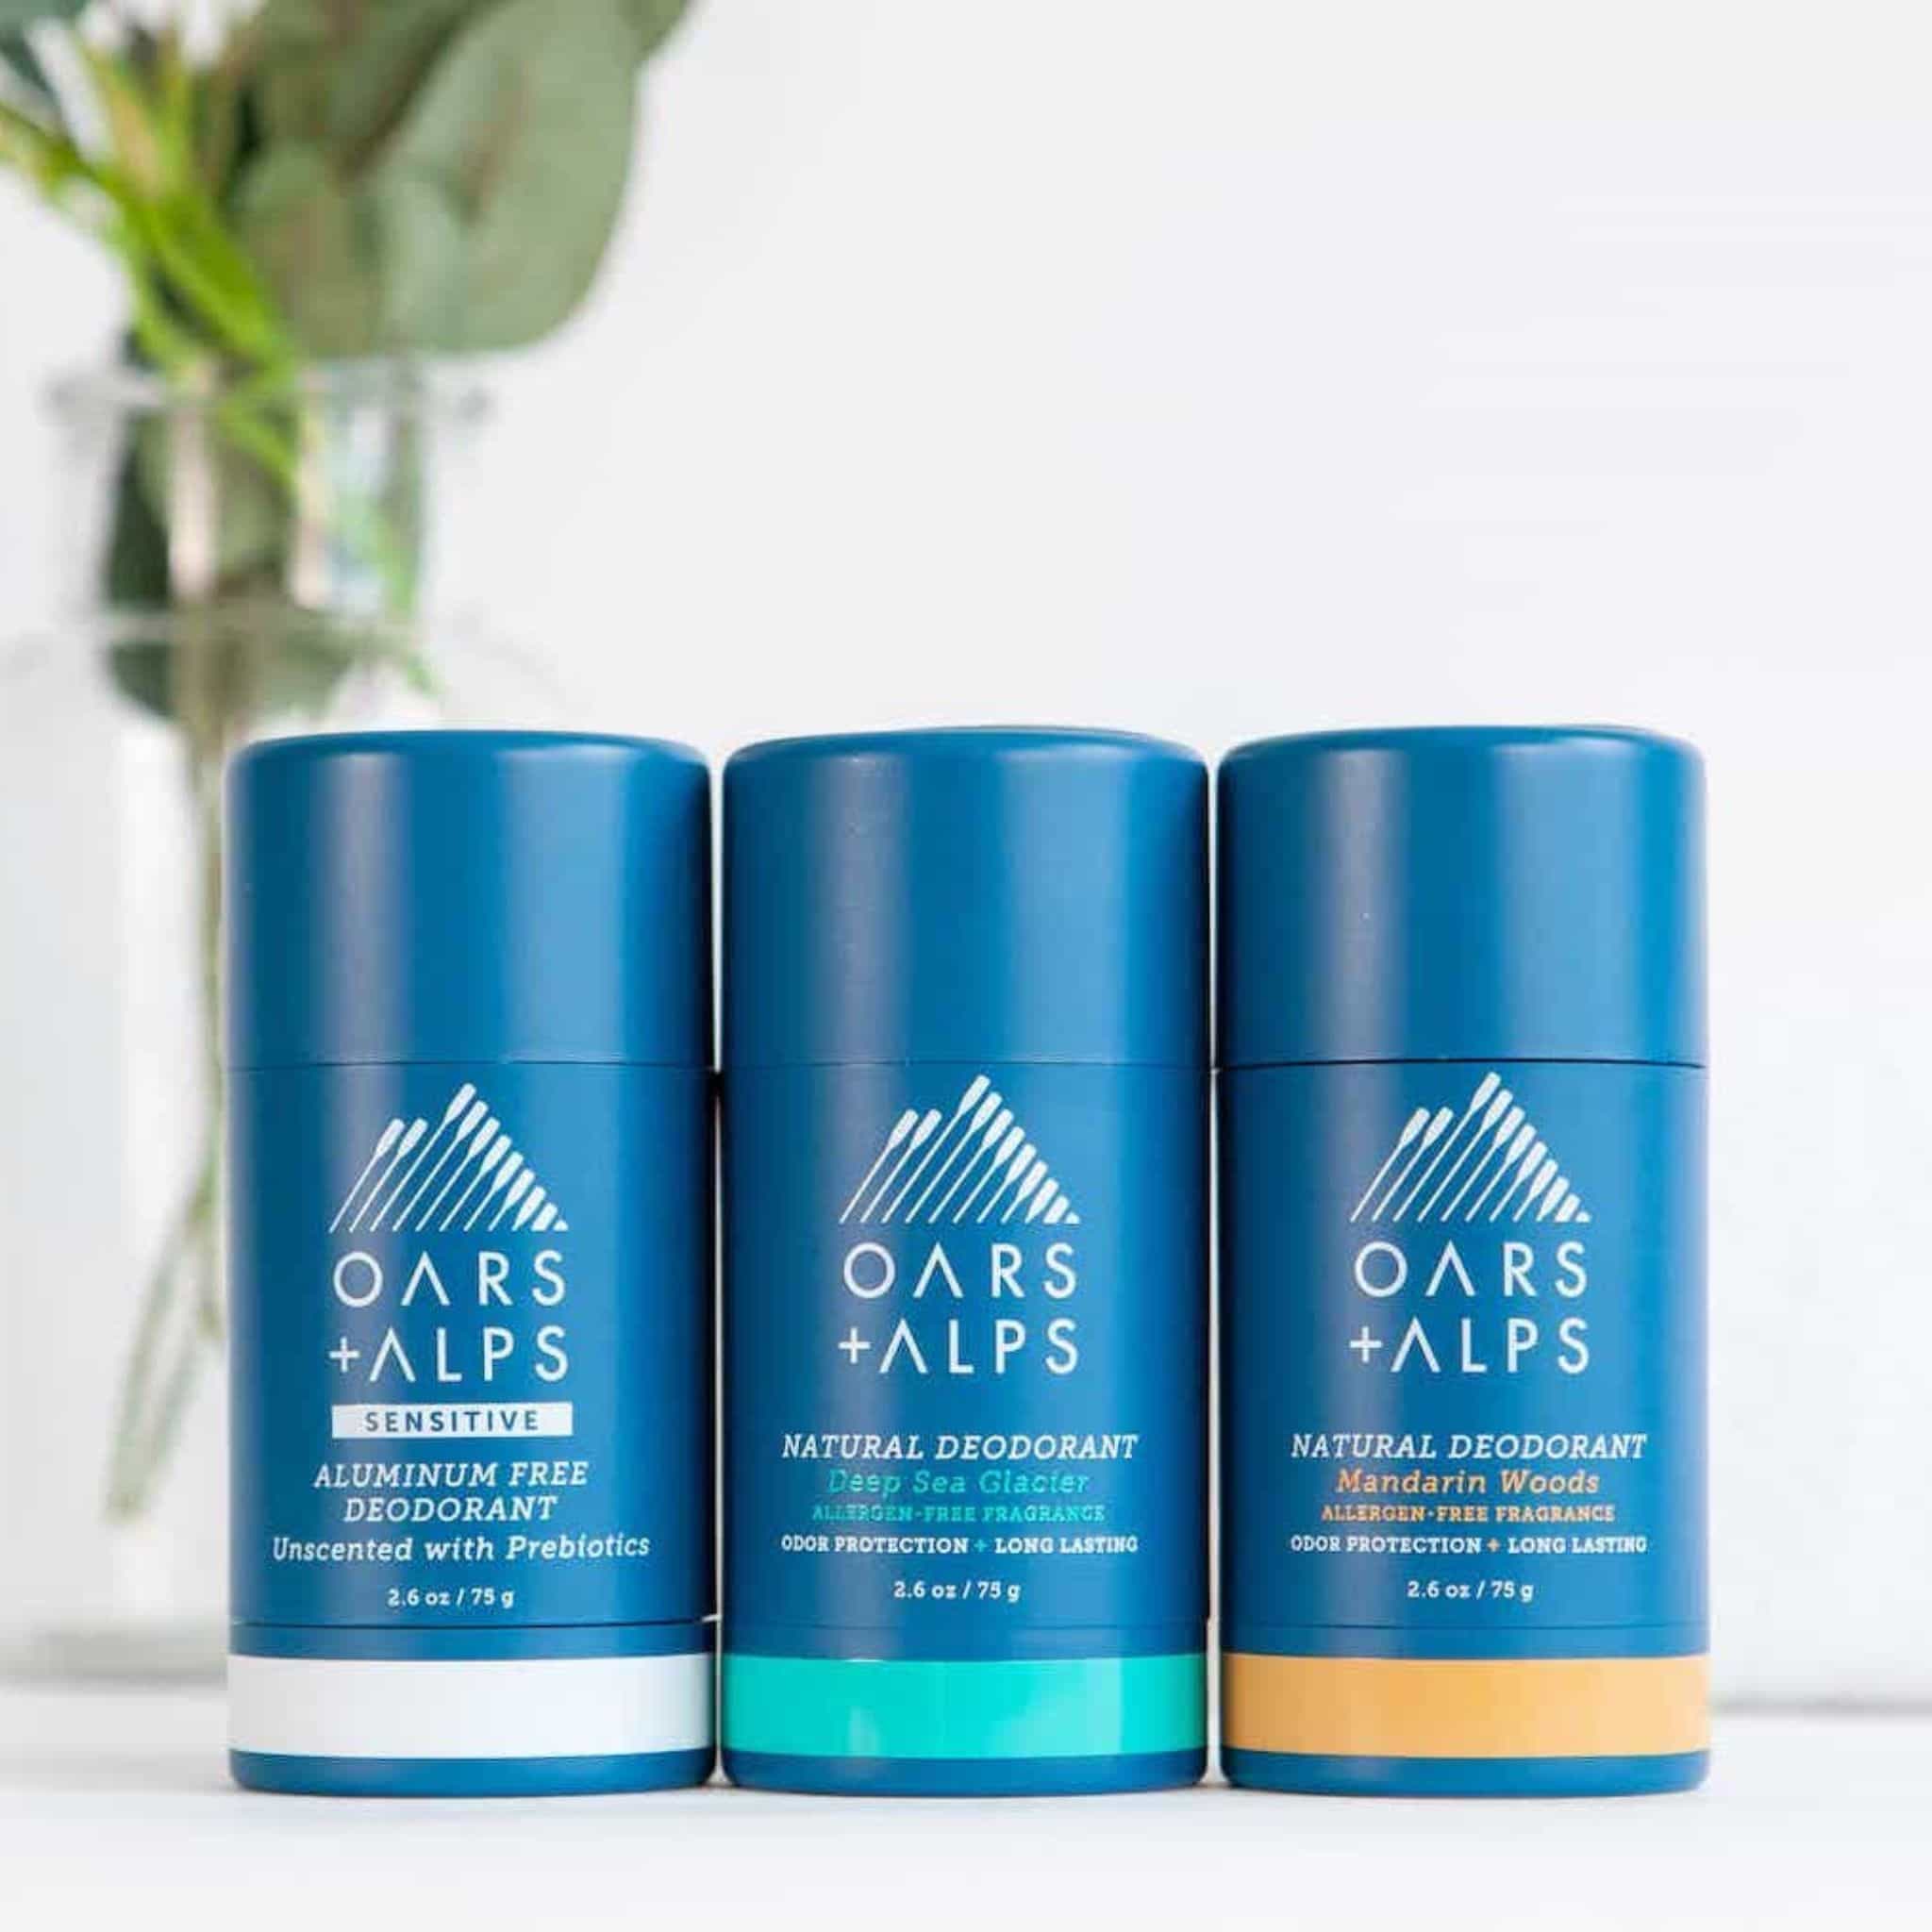 3 aluminum-free deodorants, 2 with allergen-free fragrance, and 1 unscented deodorant.